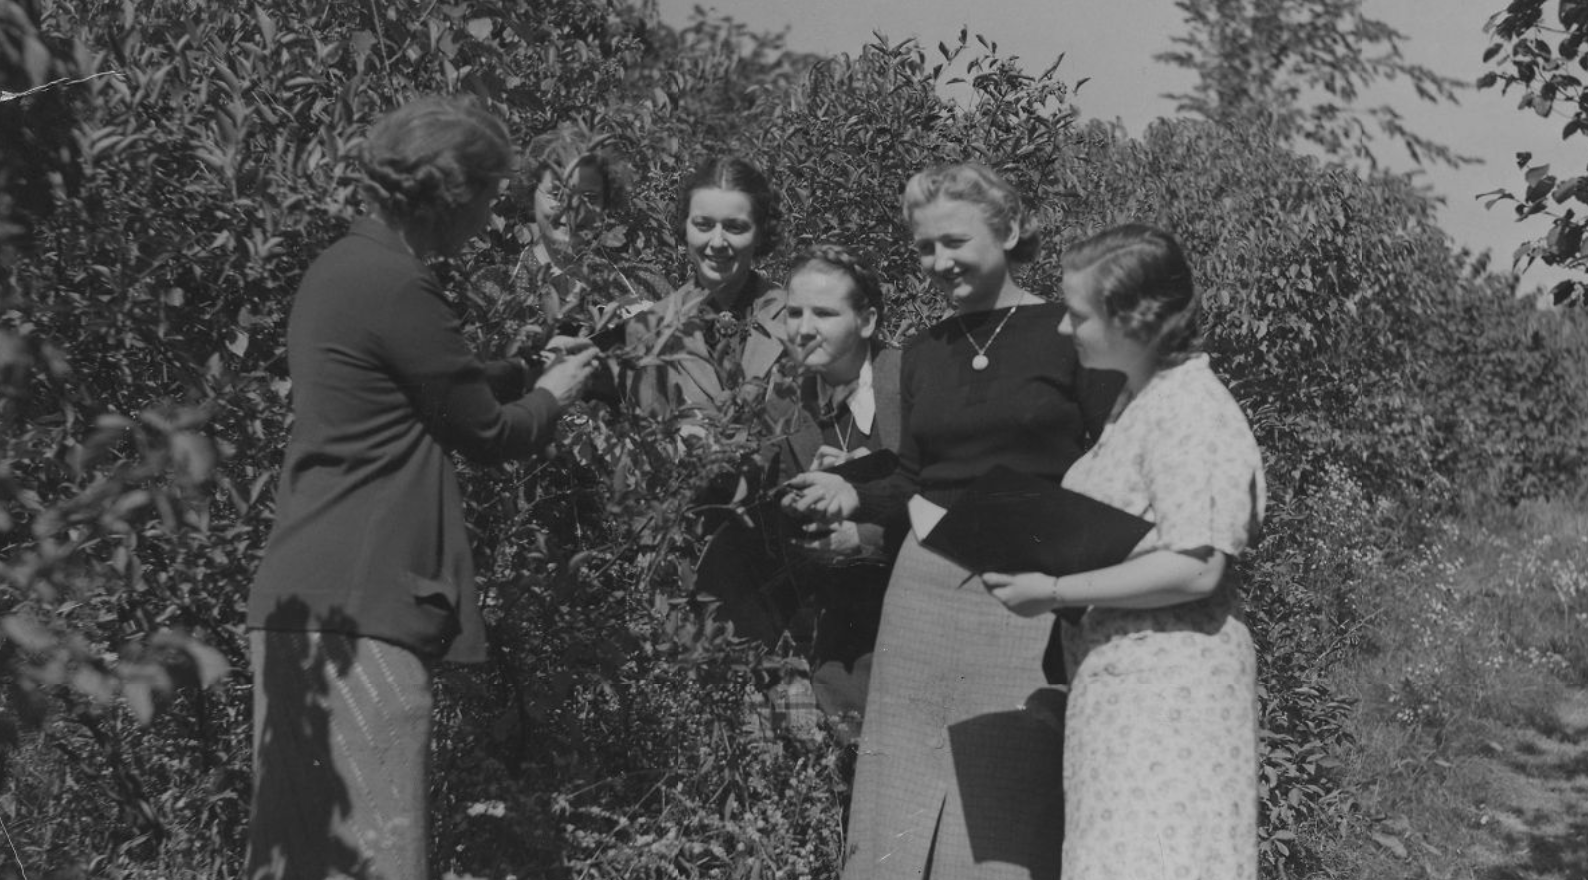 black and white view of 6 women wearing dresses, back view of 1 wearing dress and holding part of a plant, 5 women stand next to each other in a semi-circle looking at the plant, with 2 of the women are holding notebooks / row of tall leafy plants in background / outdoors